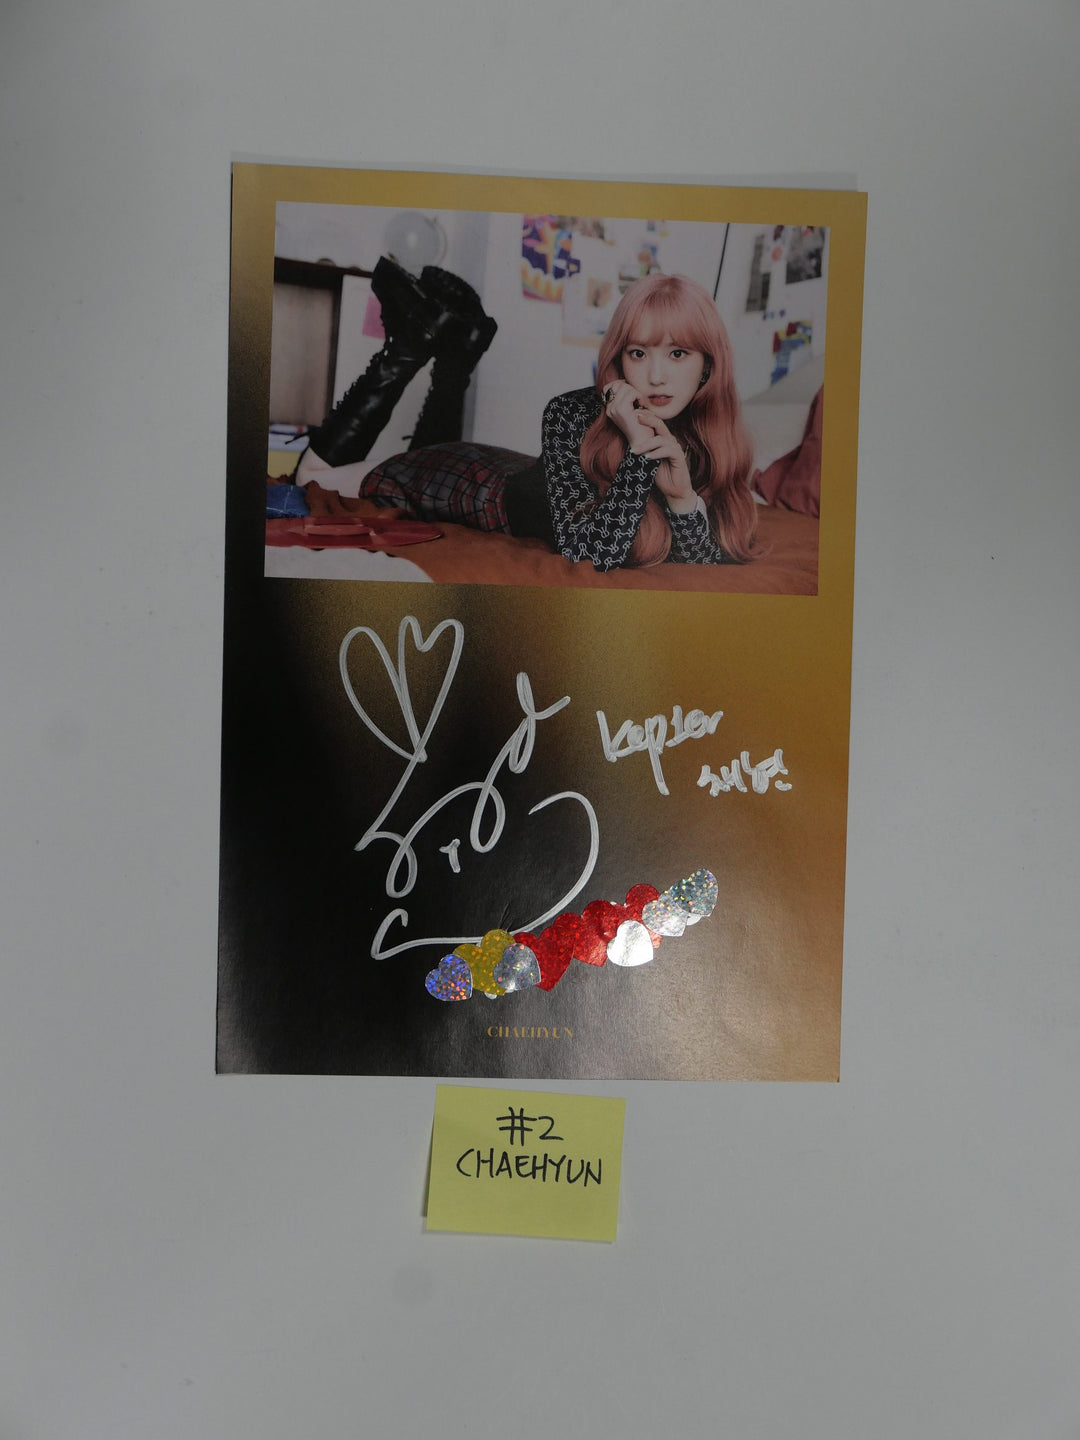 Kep1er "First Impact" 1st - A Cut Page From Fansign Event Album [CHAEHYUN, DAYEON, HIKARU]